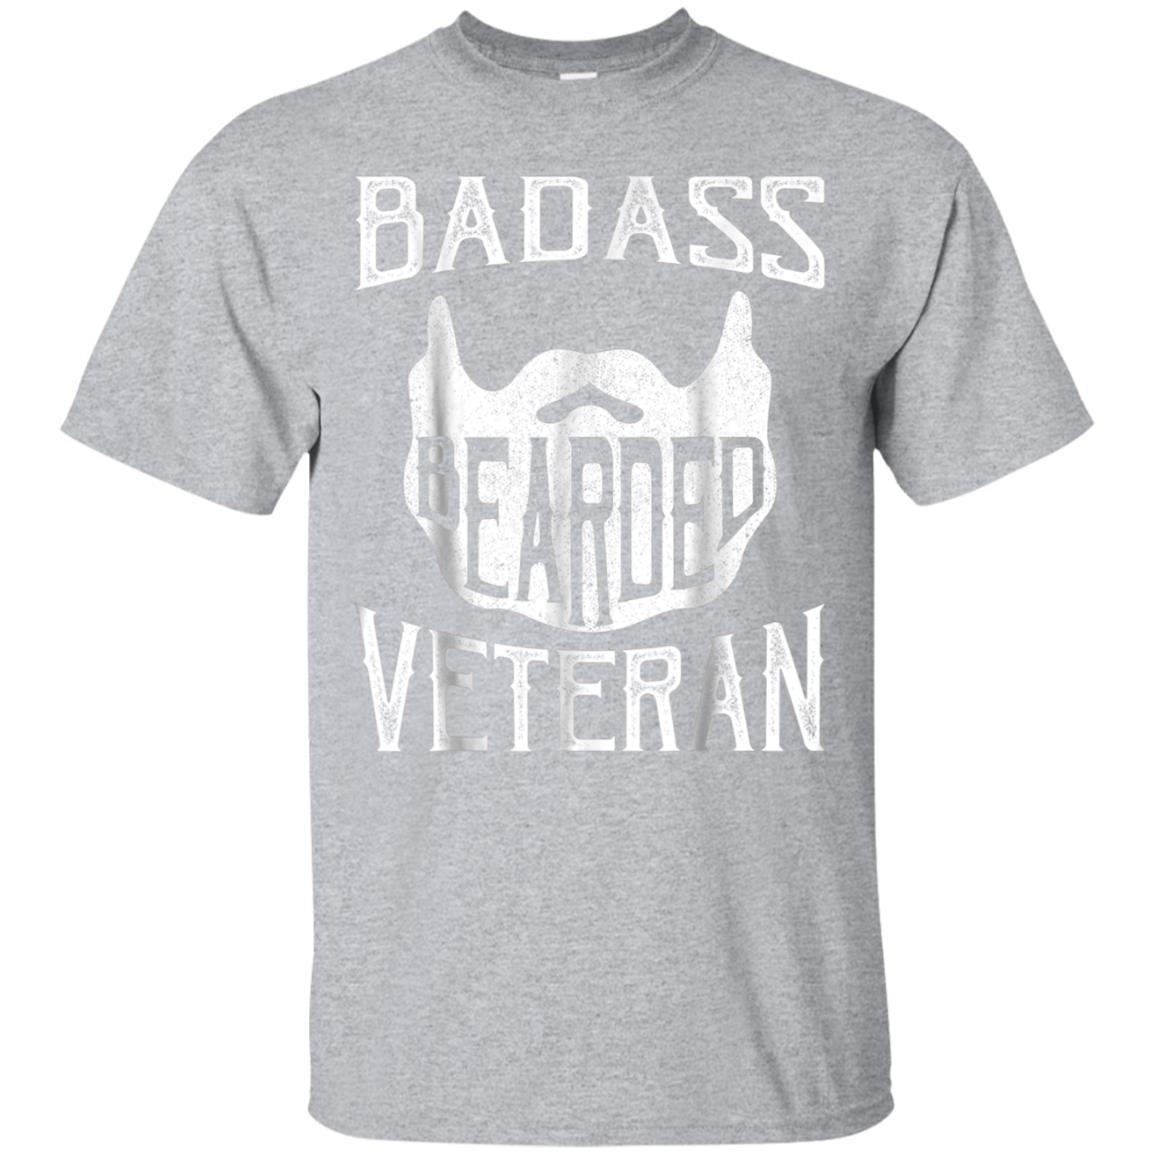 Awesome Badass Bearded Uncle Grandpa Dad Veterans Day Gift Shirt 99promocode